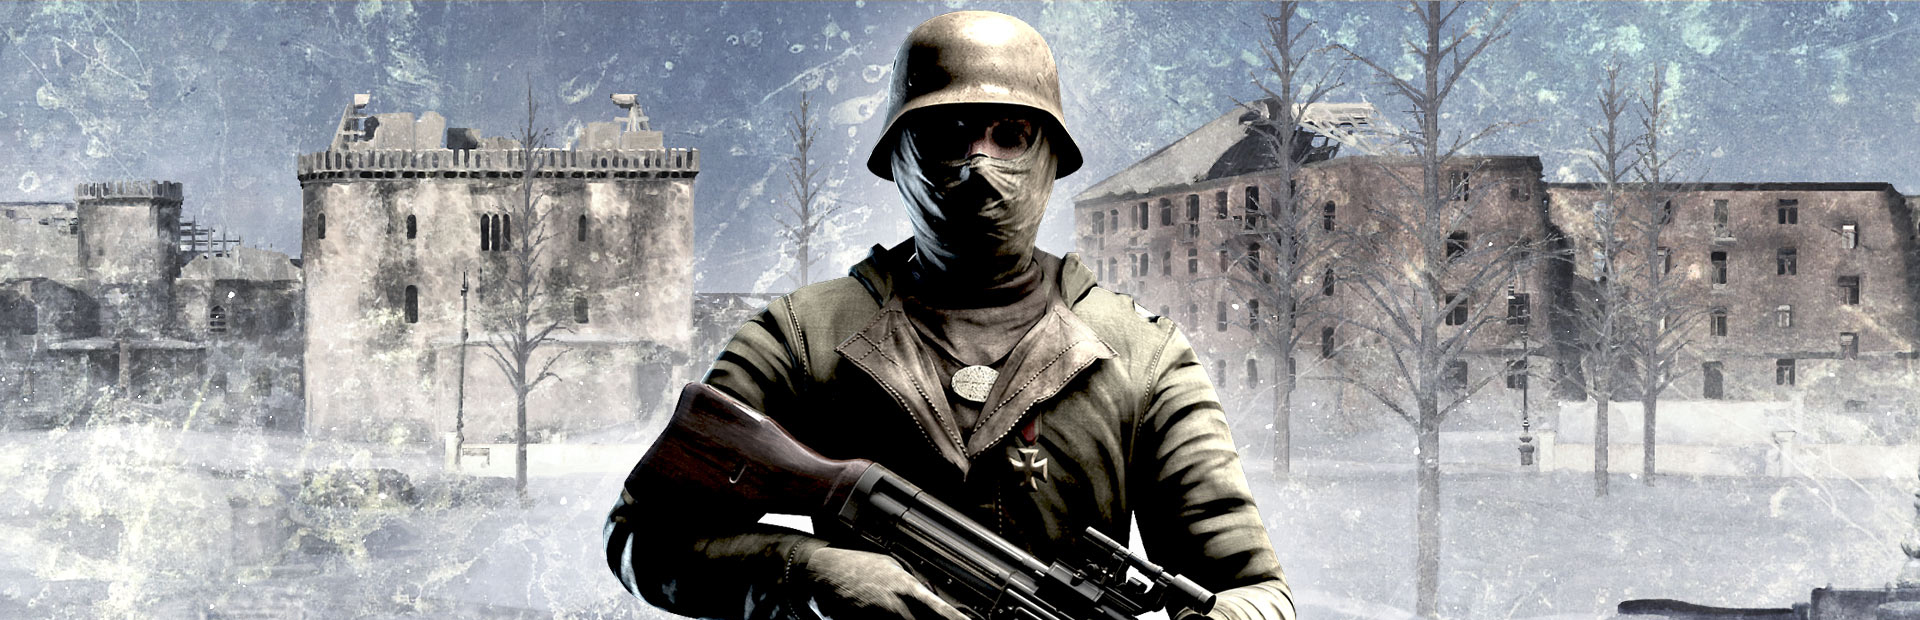 red orchestra 2 heroes of stalingrad single player